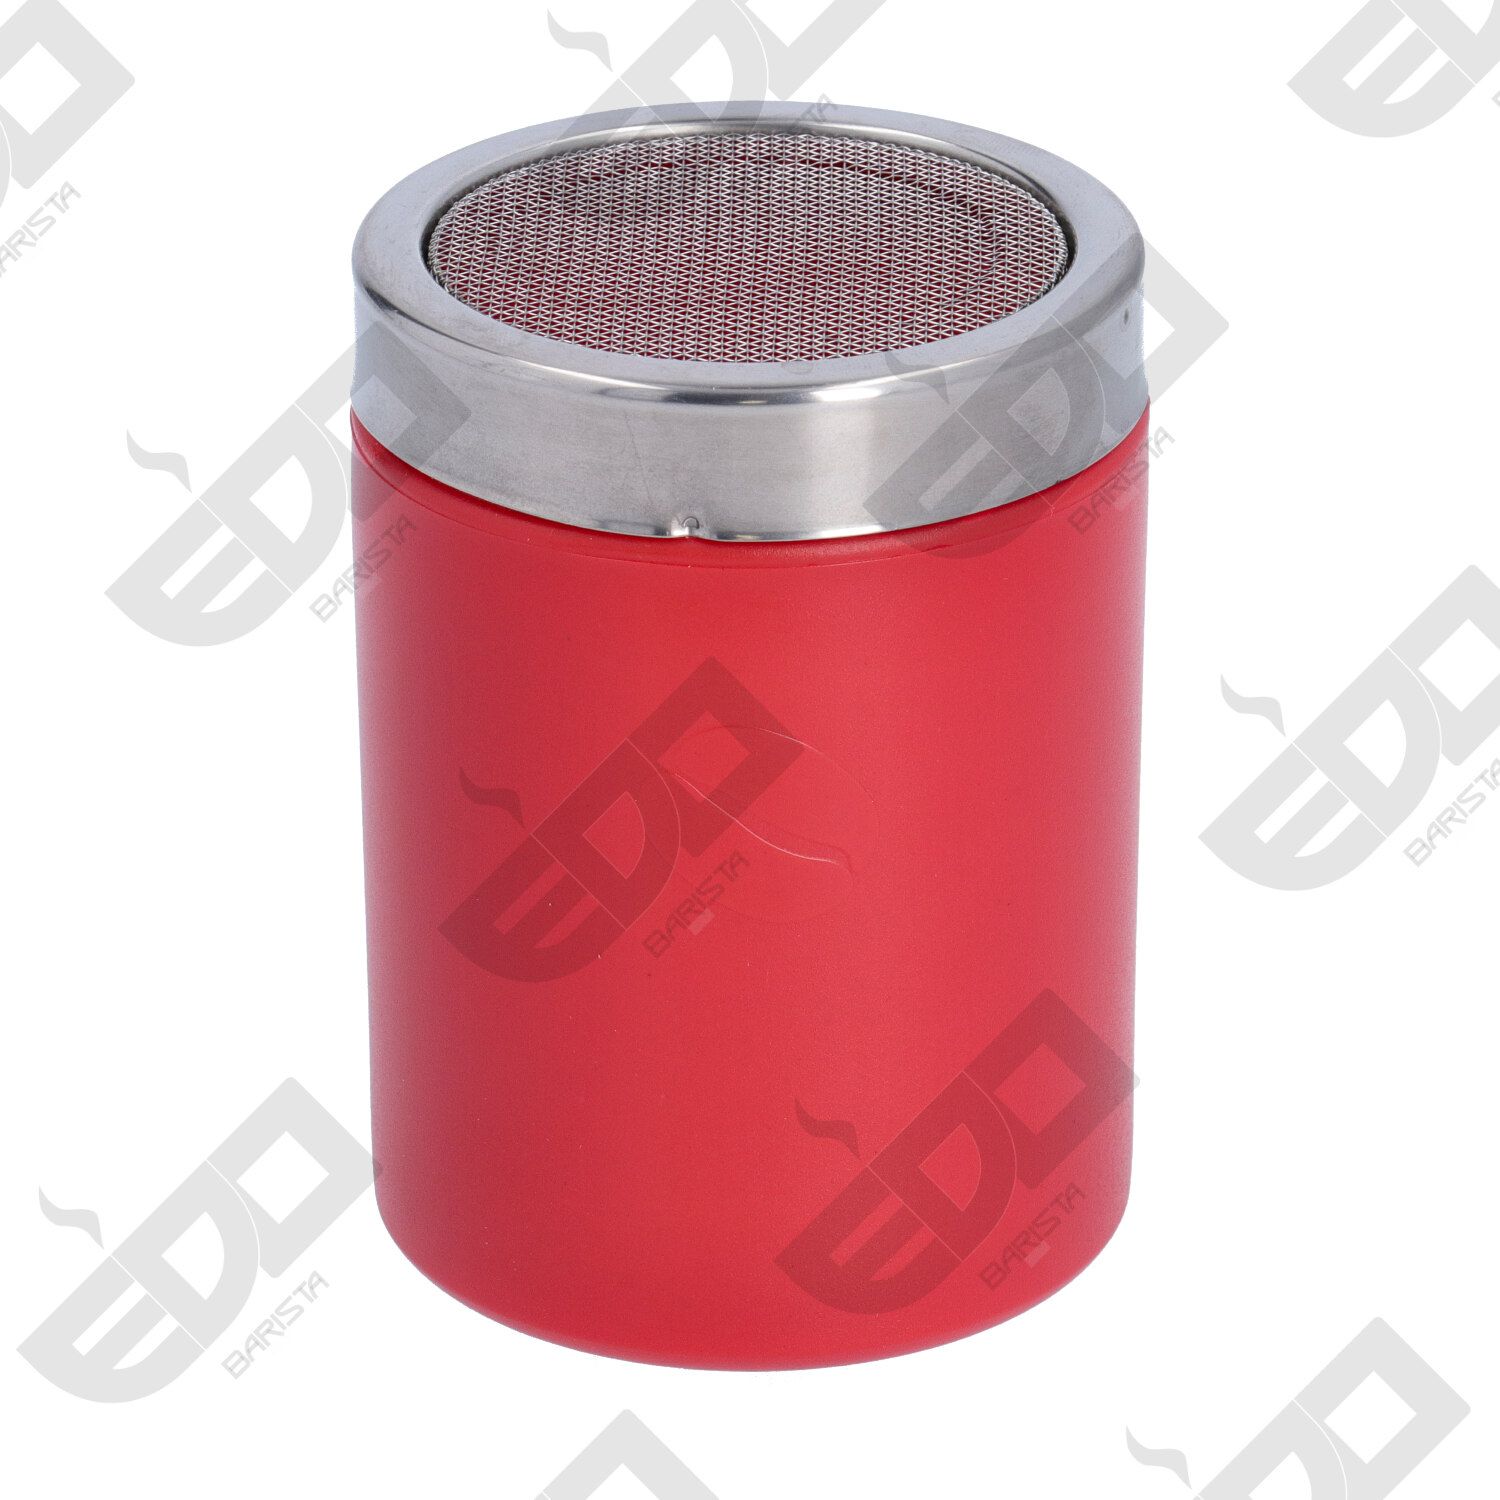 RED COCOA SHAKER WITH SMALL HOLES